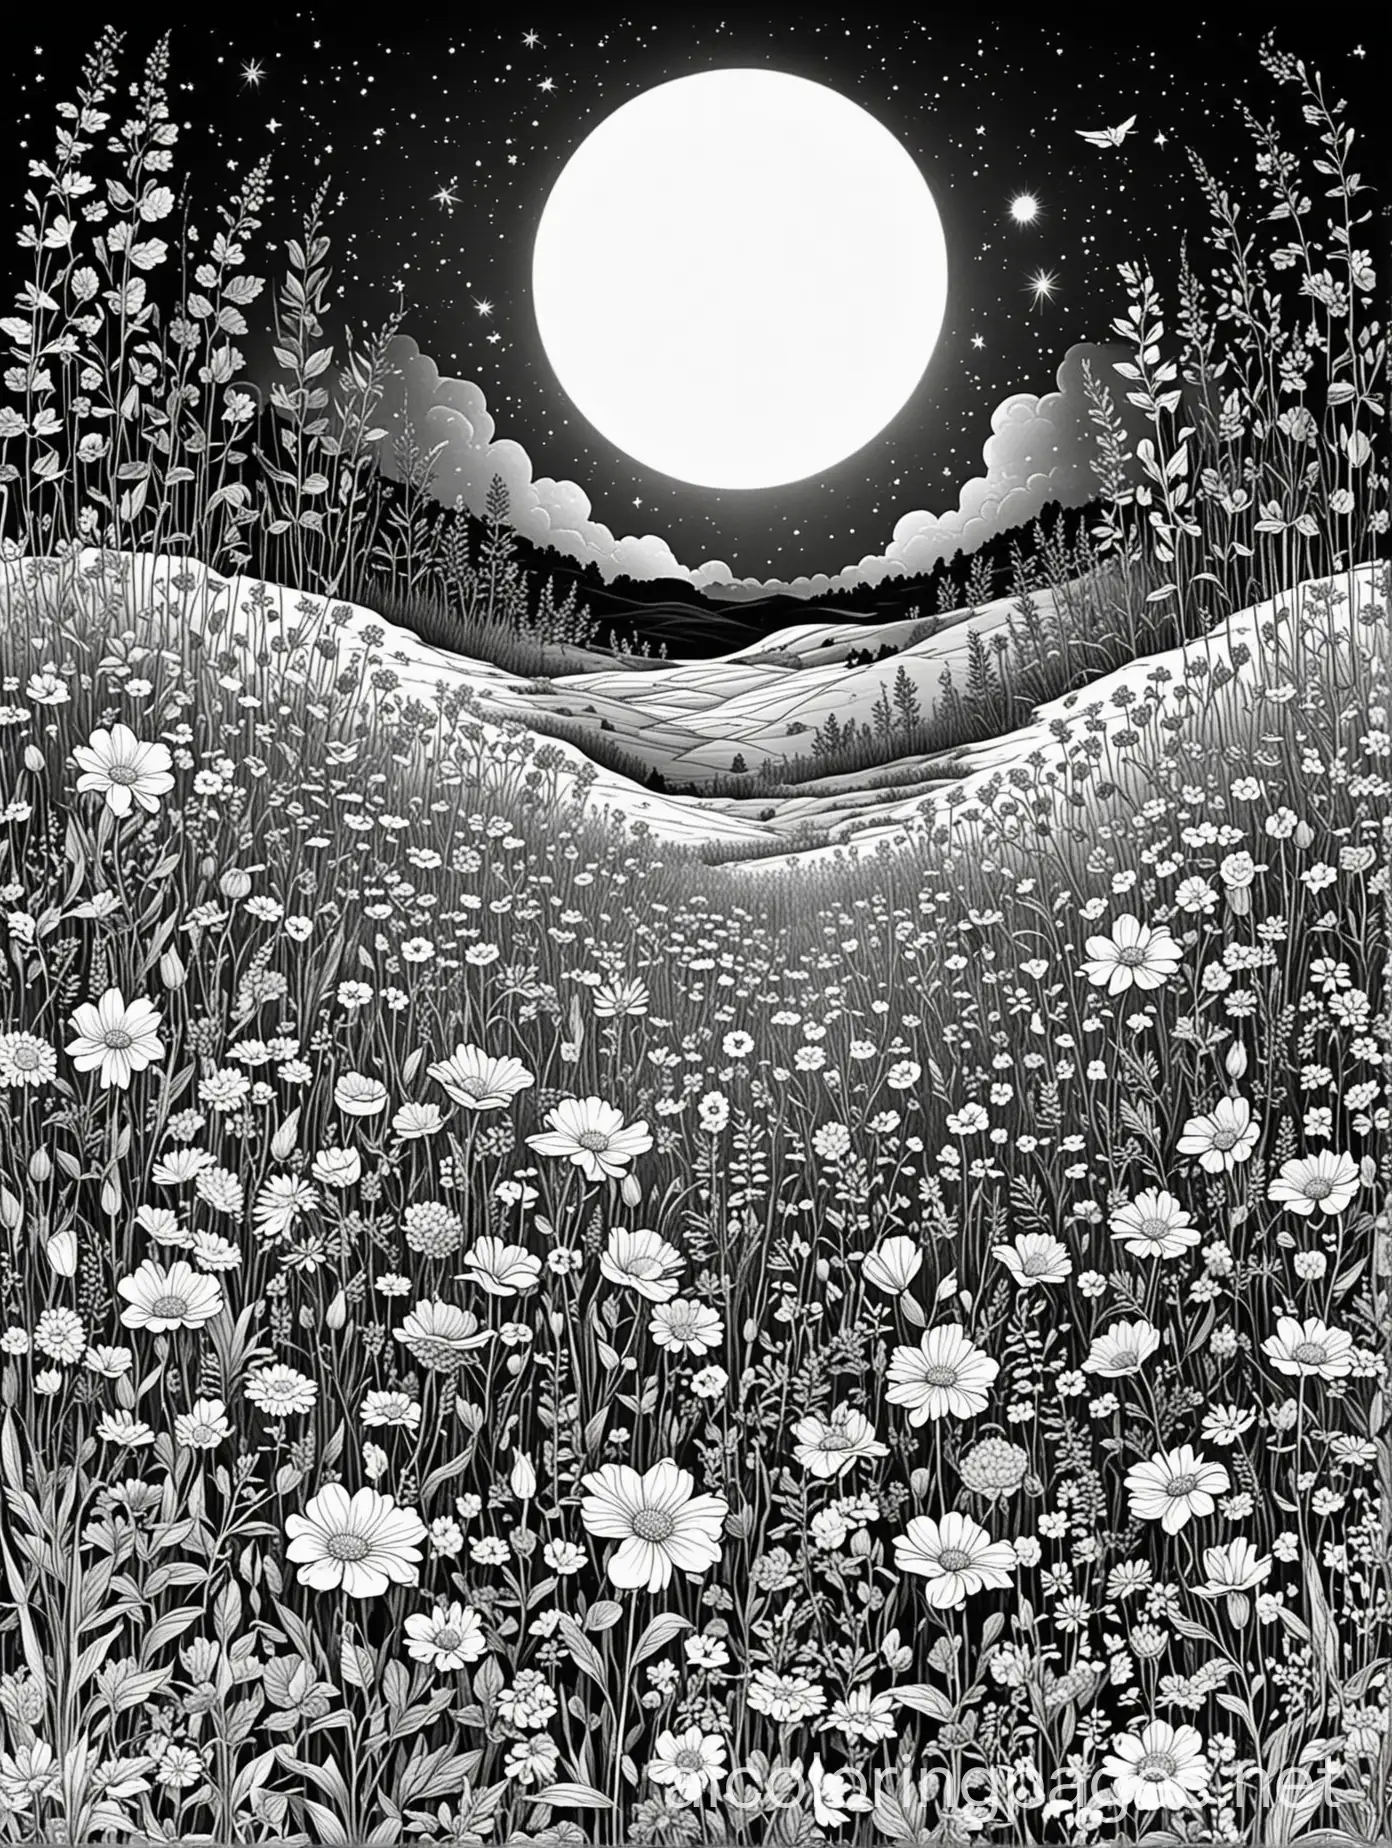 a beautiful field of wildflowers in the moonlight, Coloring Page, black and white, line art, white background, Simplicity, Ample White Space. The background of the coloring page is plain white to make it easy for young children to color within the lines. The outlines of all the subjects are easy to distinguish, making it simple for kids to color without too much difficulty